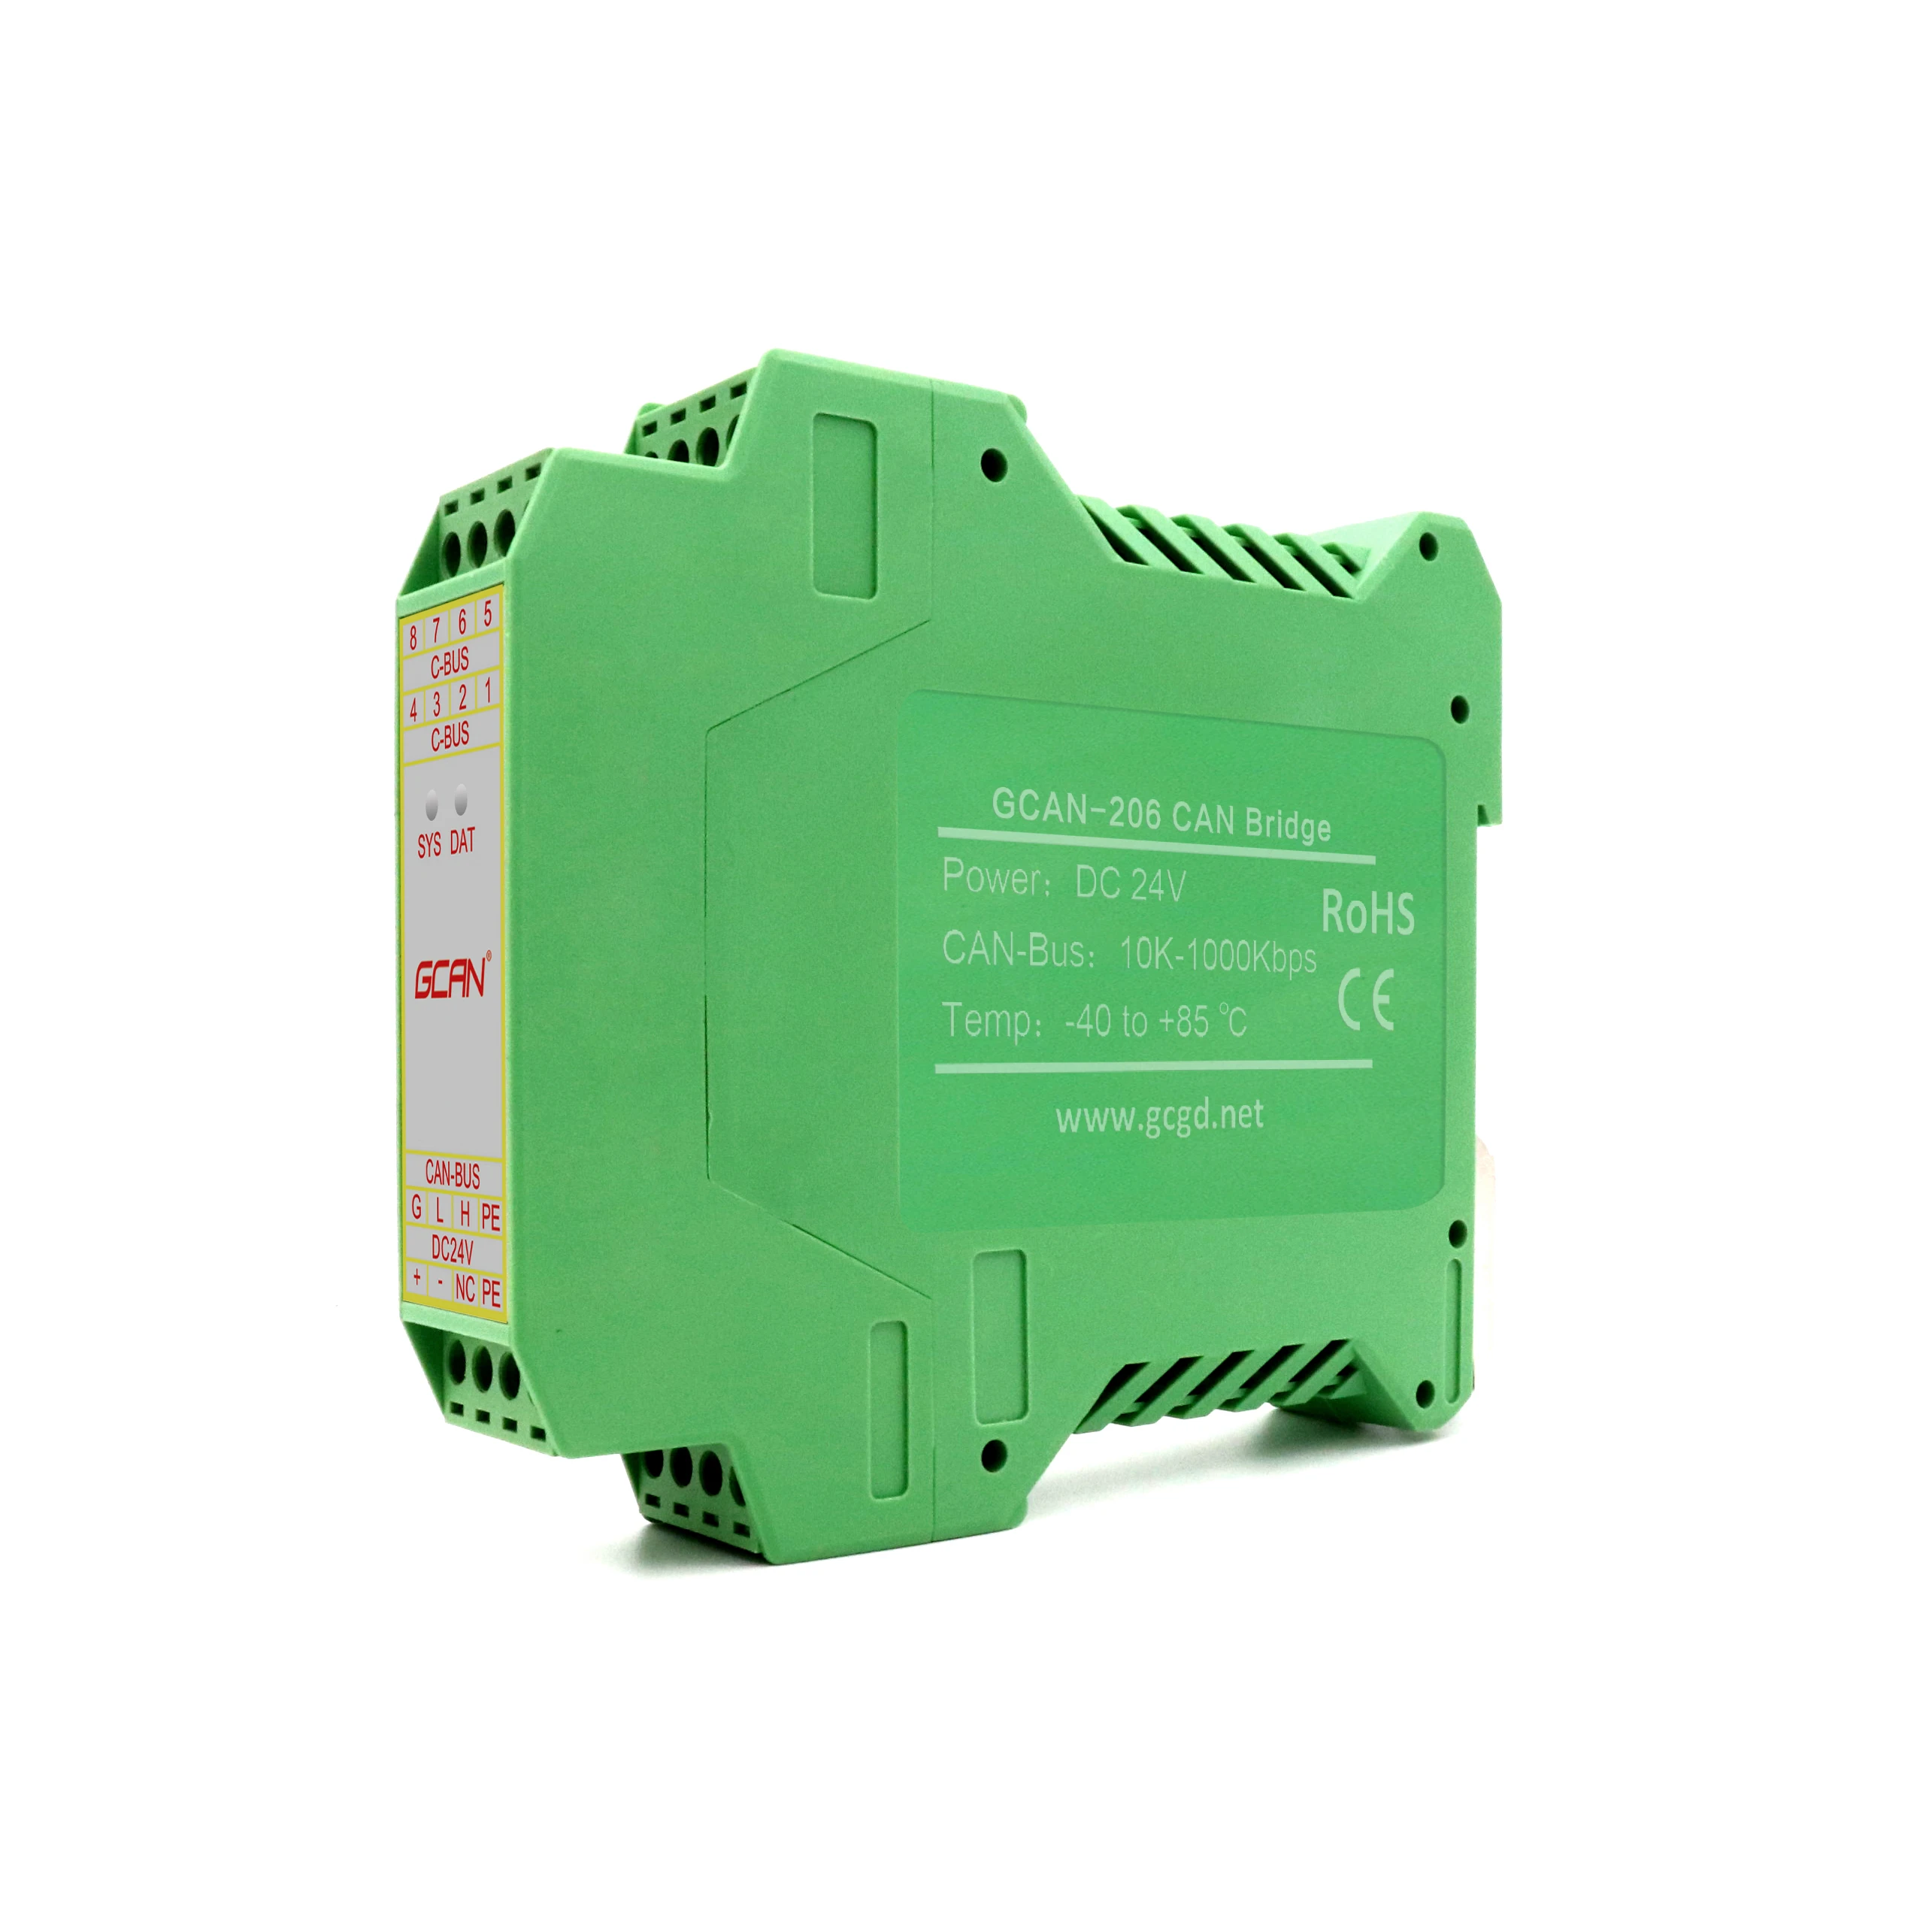 GCAN-206 Bus Repeater Module Forward The Data Between Two Can Networks To Realize The Relay Function Of The Network